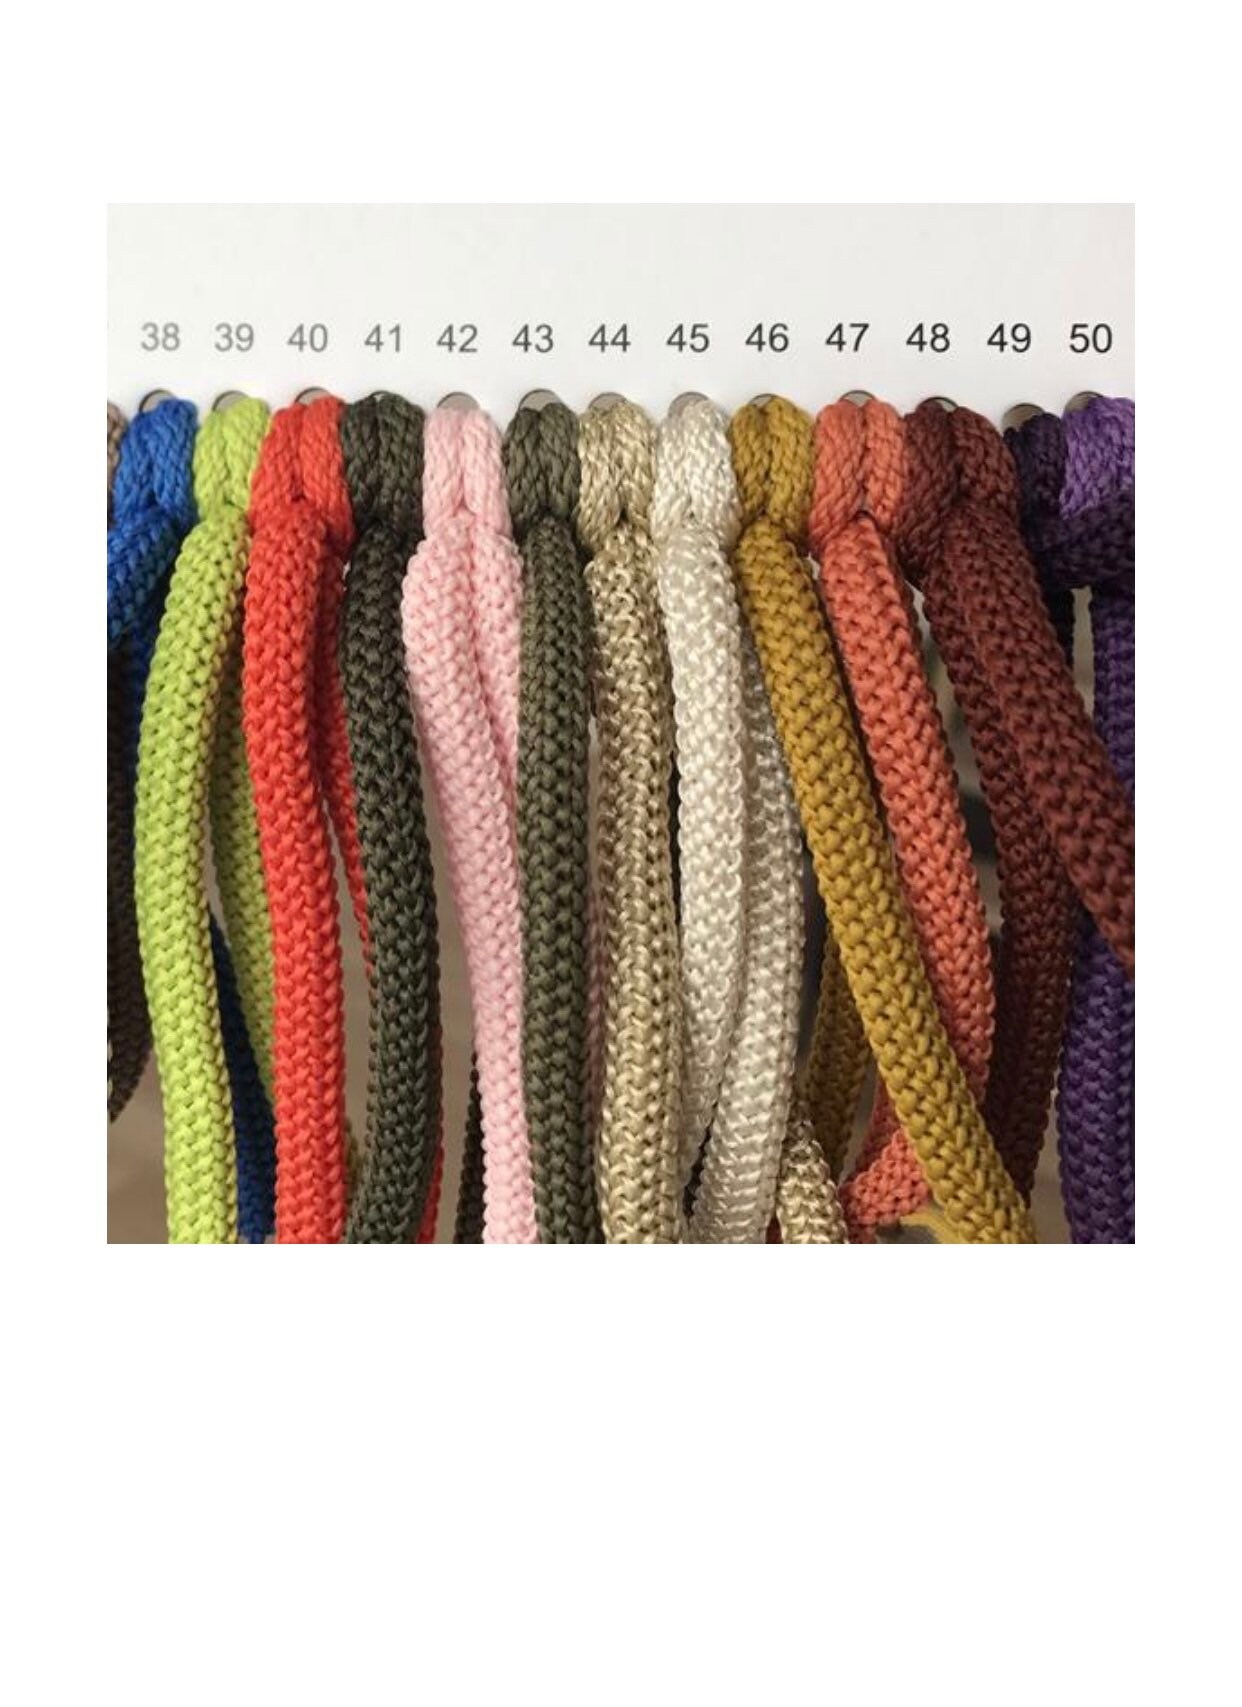 Polyester Rope, Colored Rope 6mm, Soft Cord Macramé, Strong Cord, Crochet  Yarn, Polyester Rope, Nylon Colored Cord, Craft Rope 